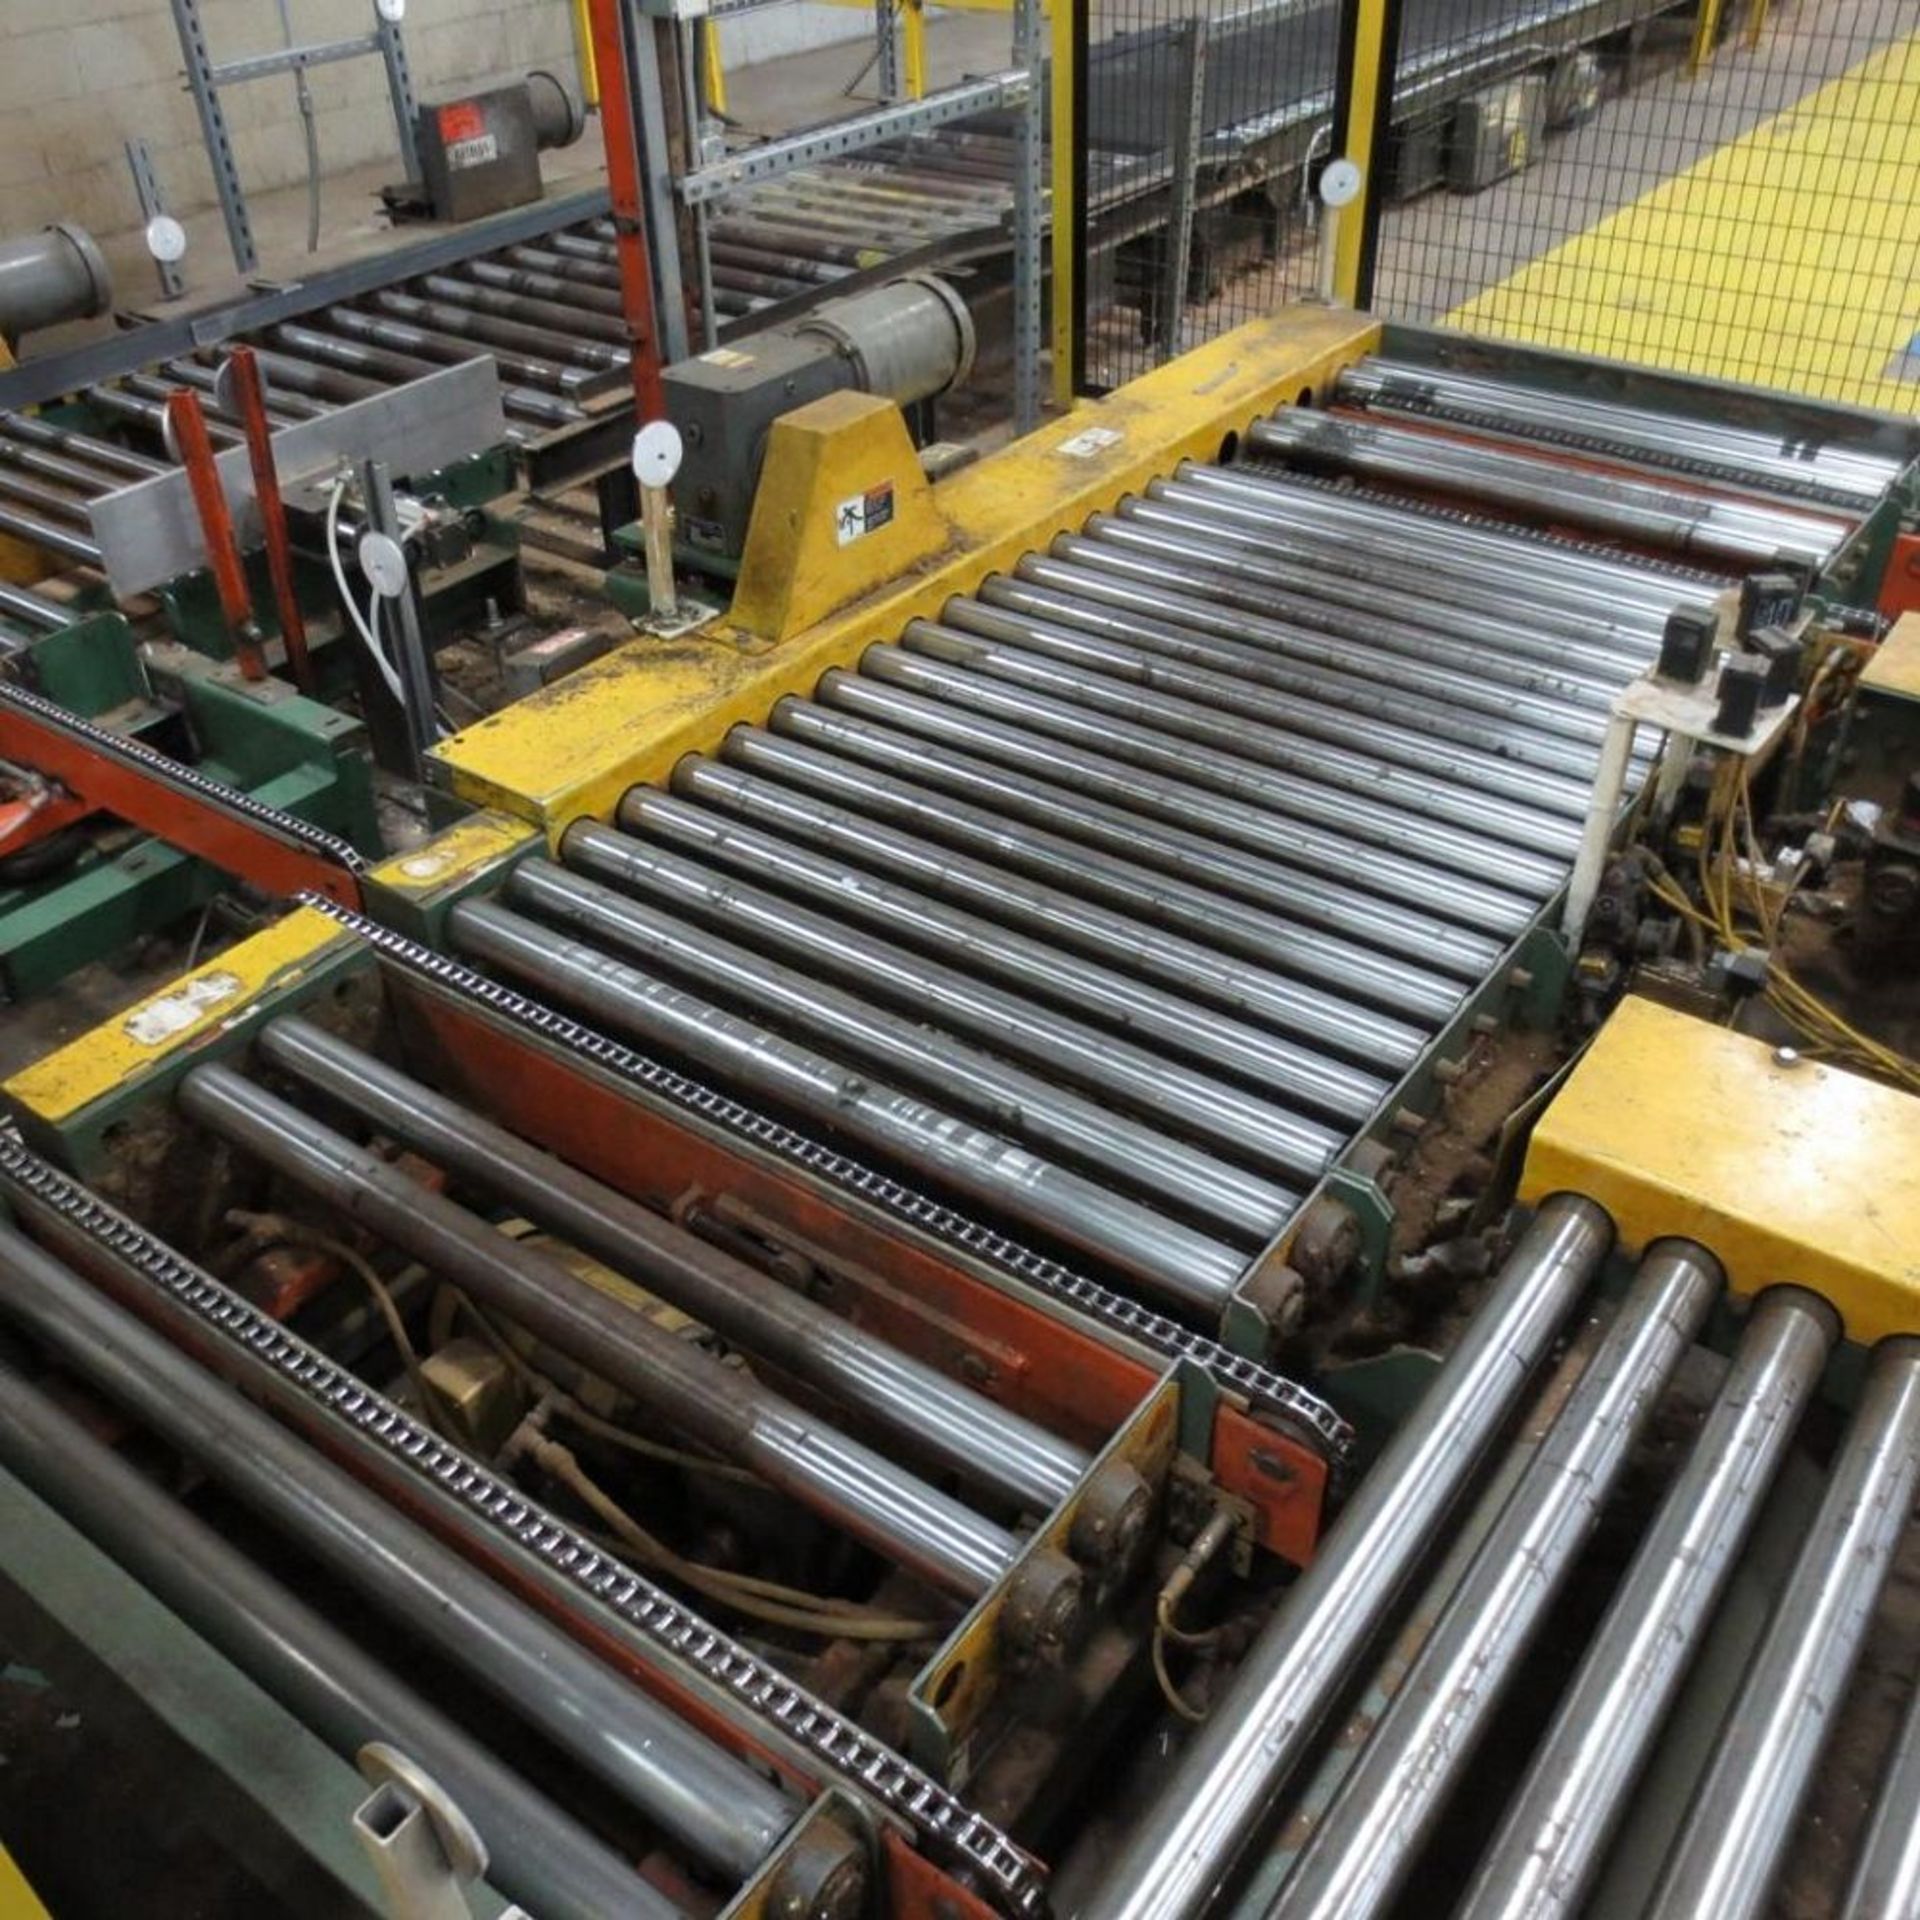 Belt and Roller Conveyor with 3 Transfers, Roller Conveyer is 39" and 29" Wide 759' Long, Belt Conve - Image 3 of 10